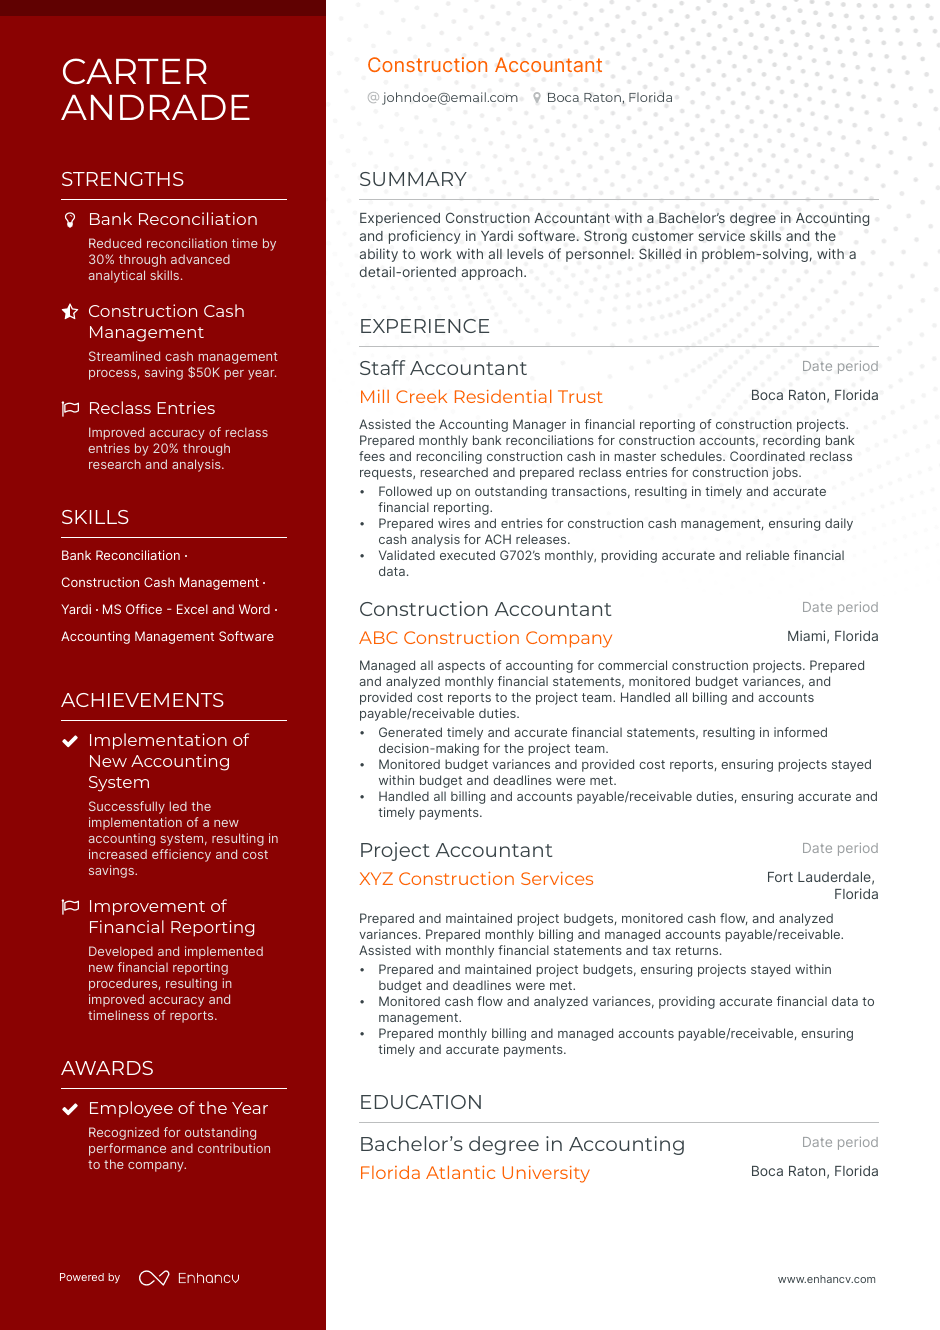 Construction accountant resume example